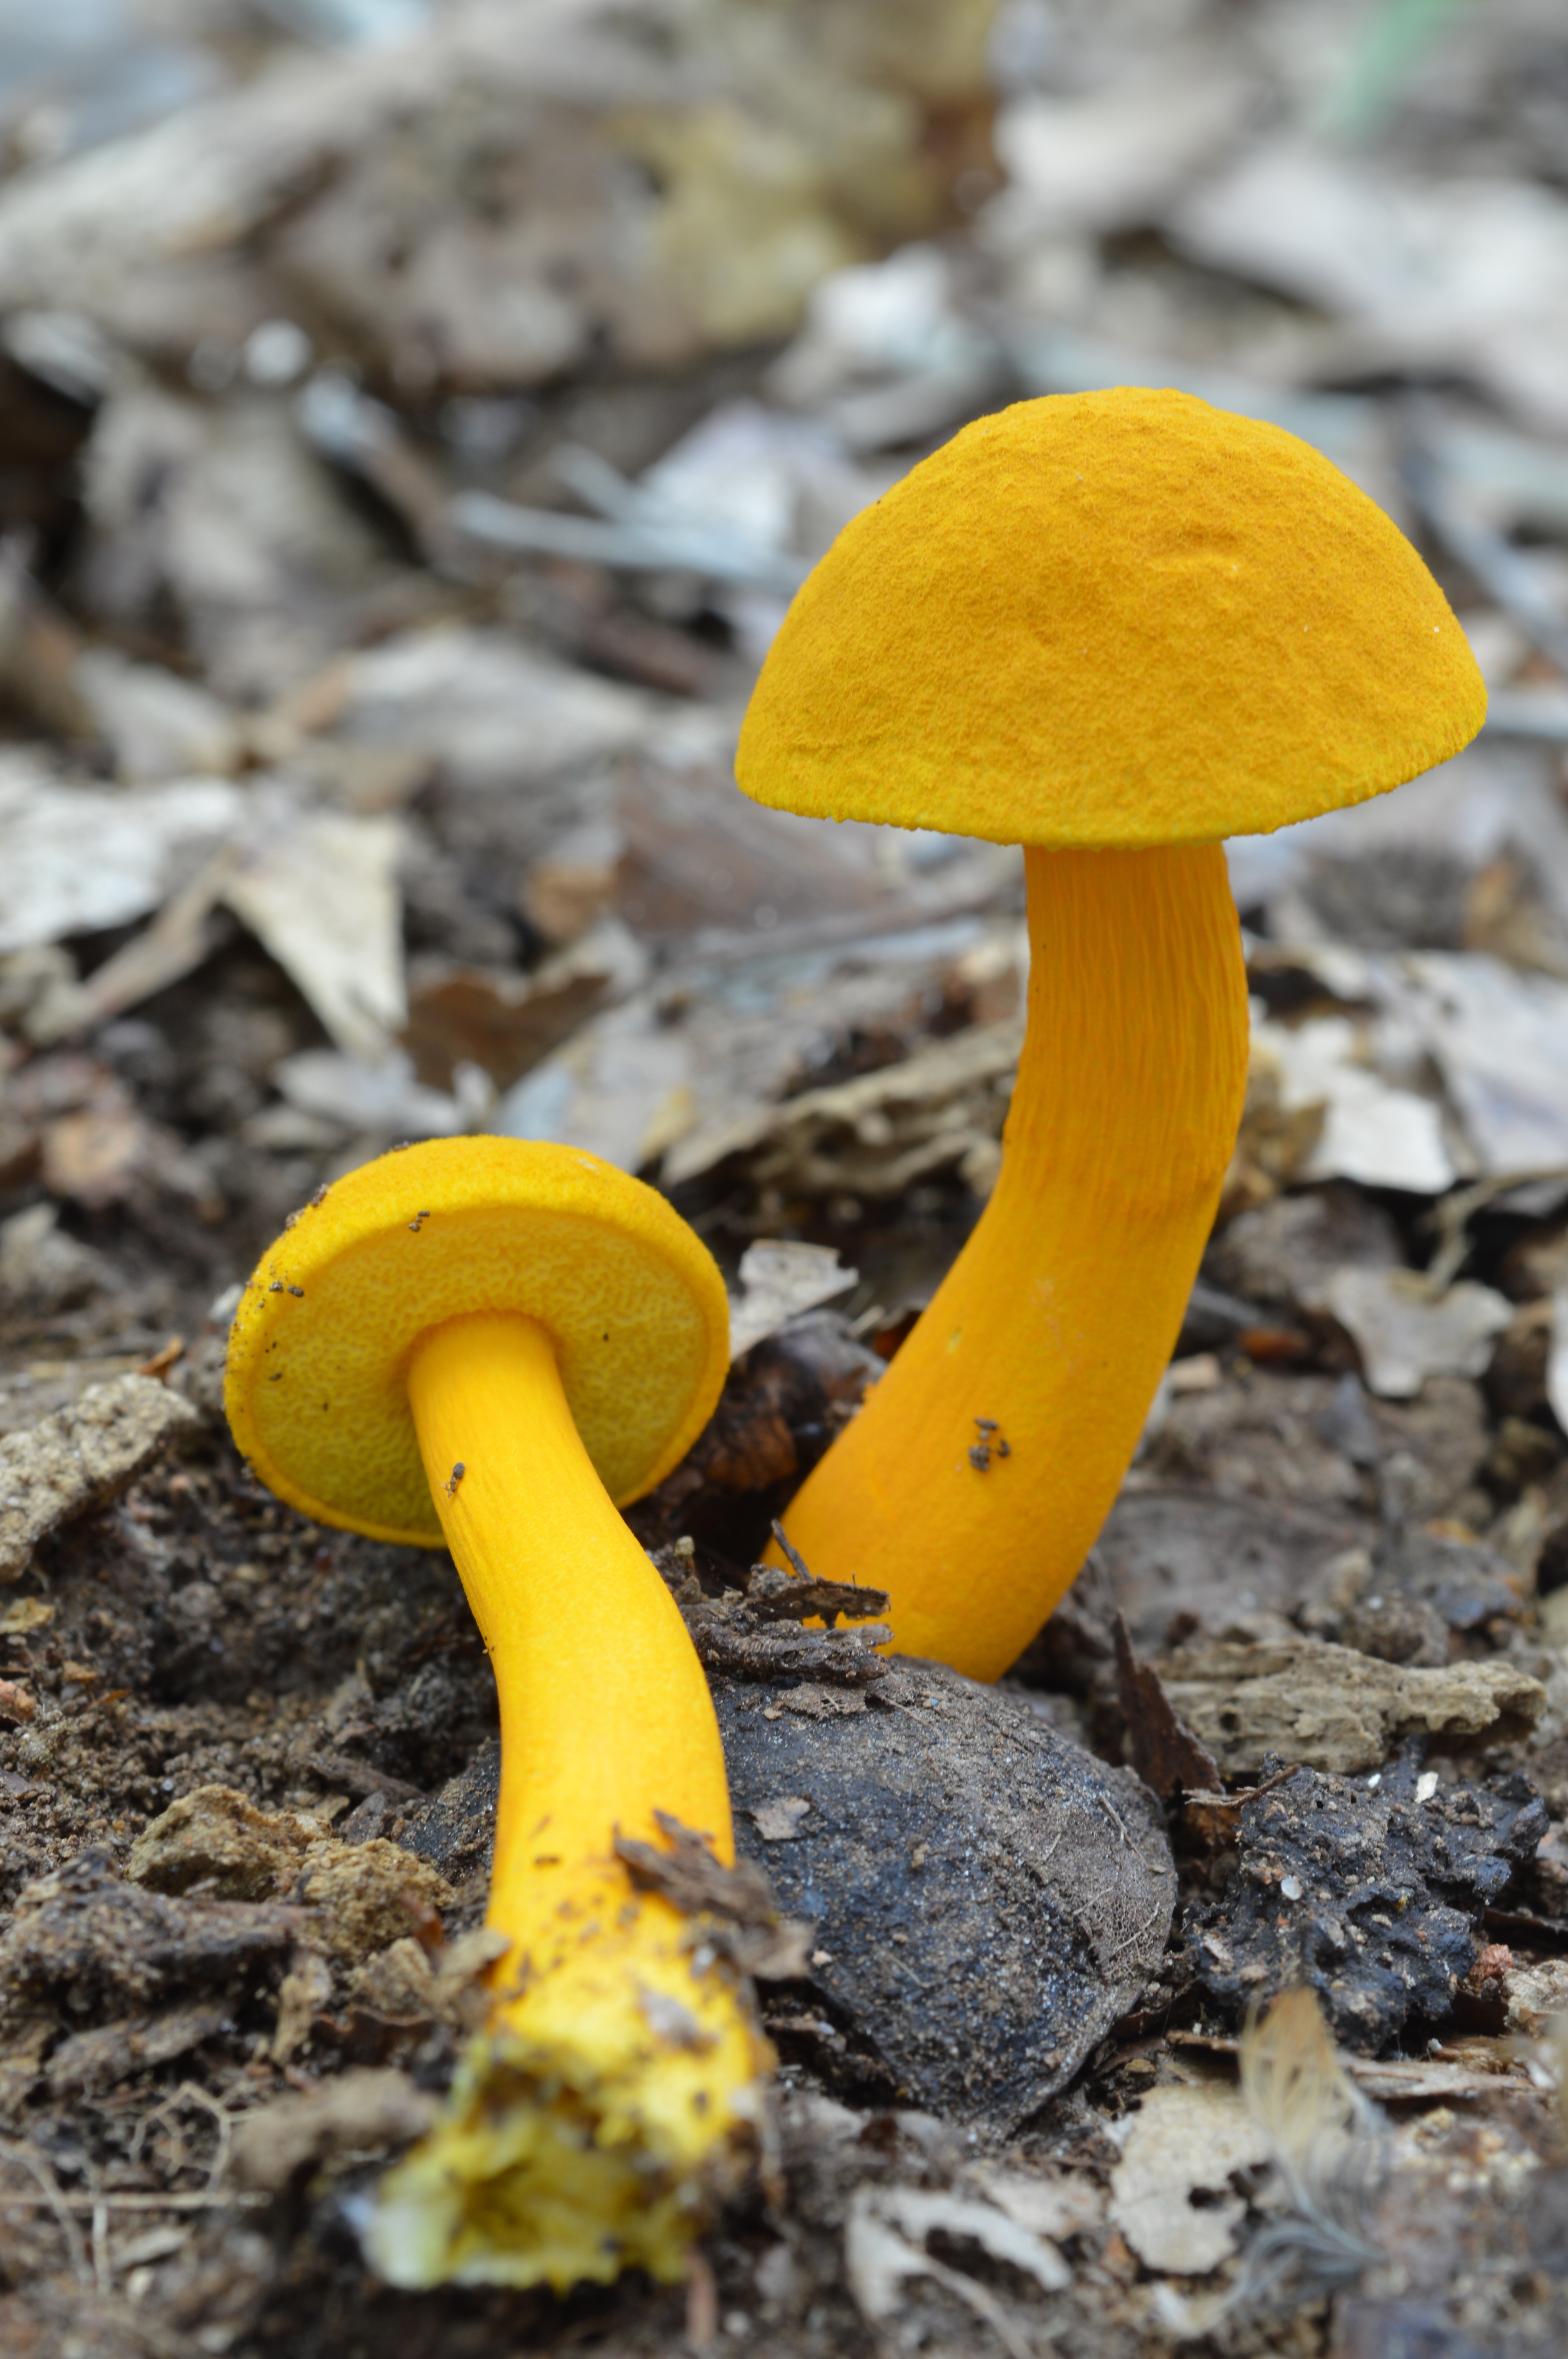 2. Found in Florida | Product categories | The Bolete Filter